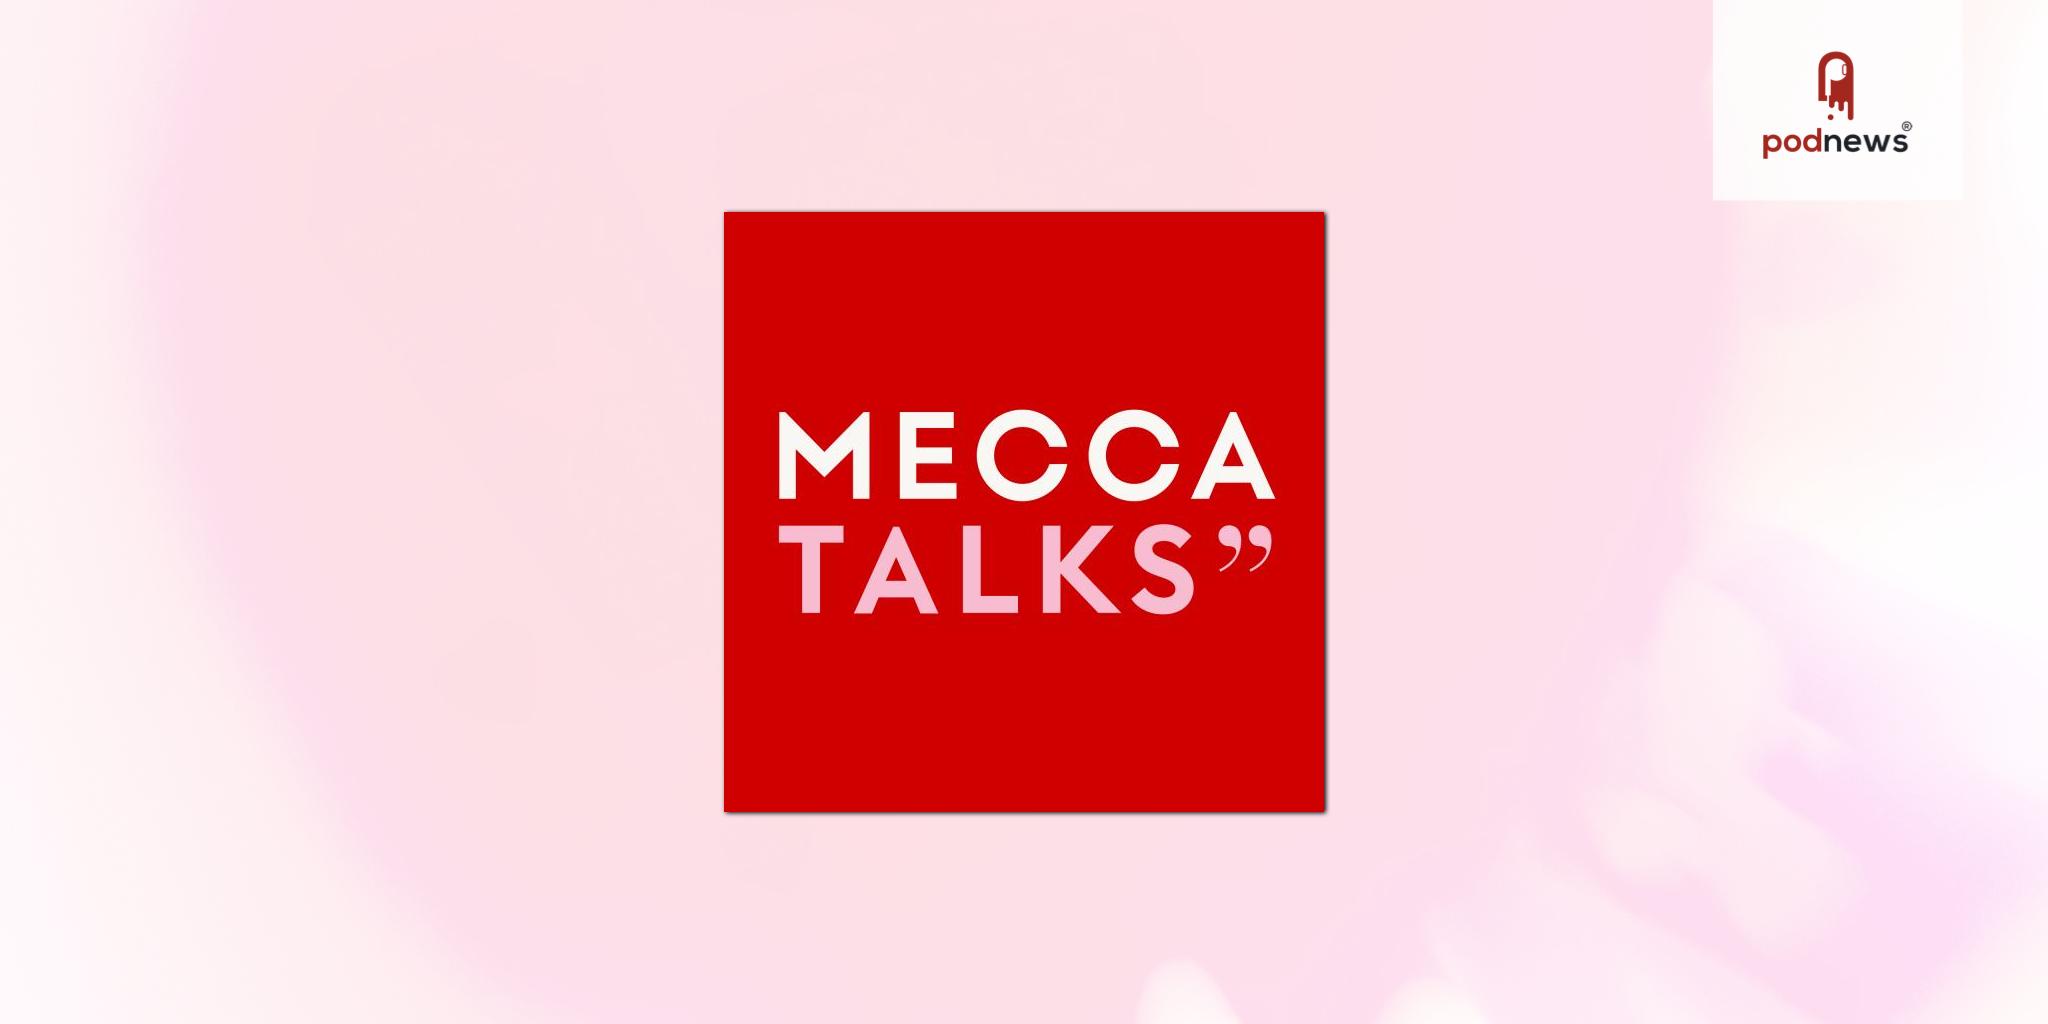 MECCA Talks: the new podcast that provides an all access pass to beauty, business and lifestyle experts